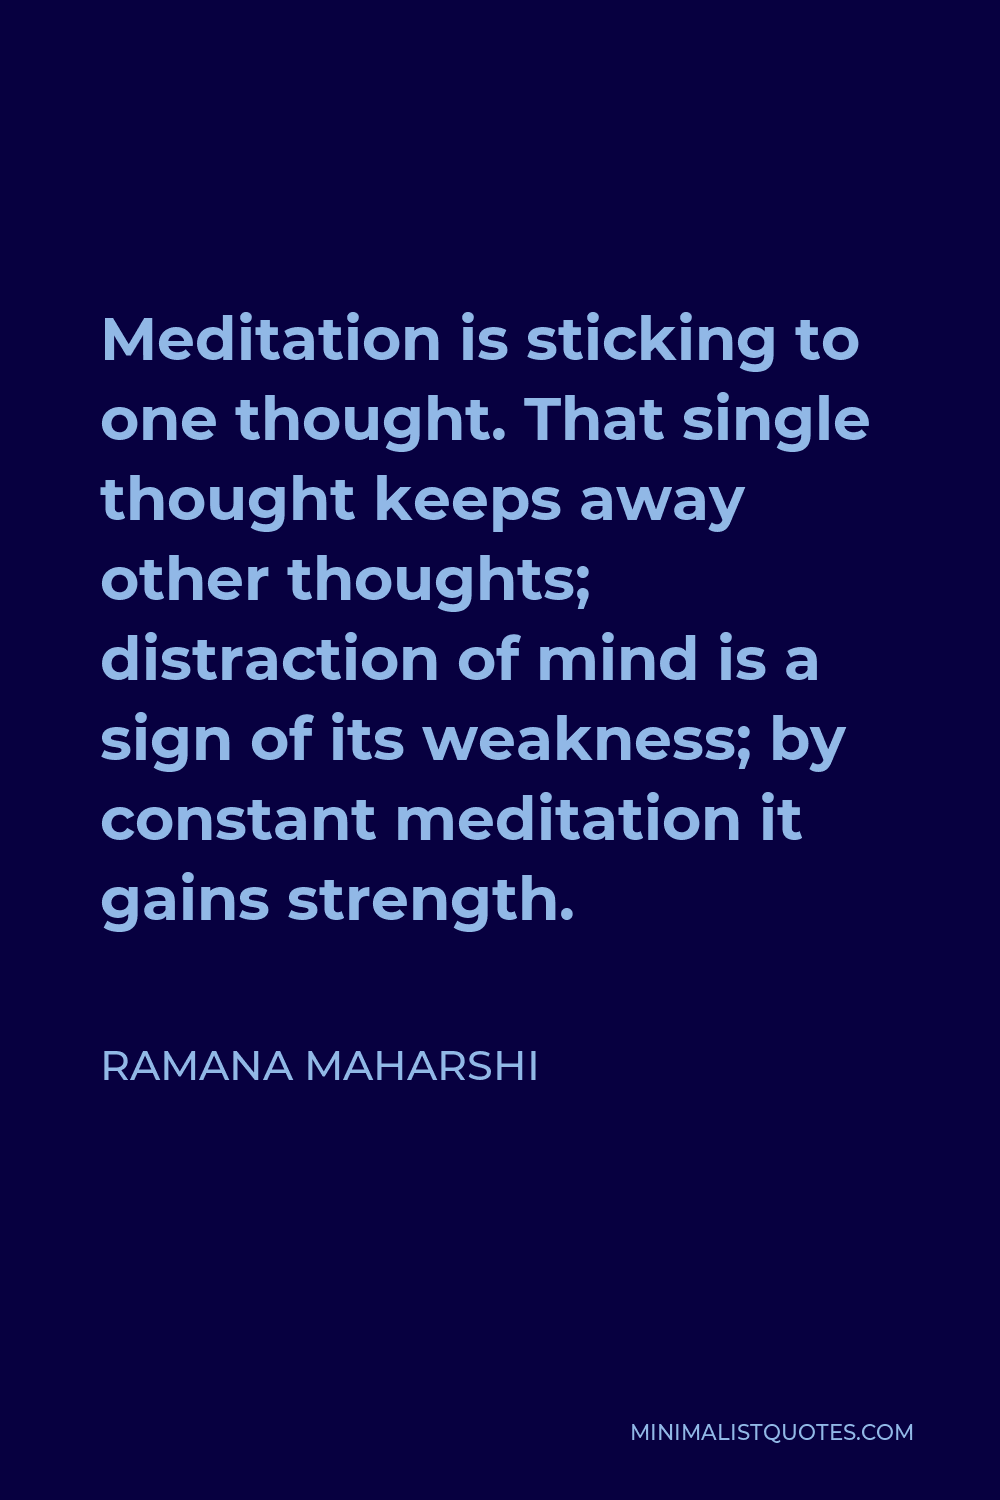 Ramana Maharshi Quote - Meditation is sticking to one thought. That single thought keeps away other thoughts; distraction of mind is a sign of its weakness; by constant meditation it gains strength.